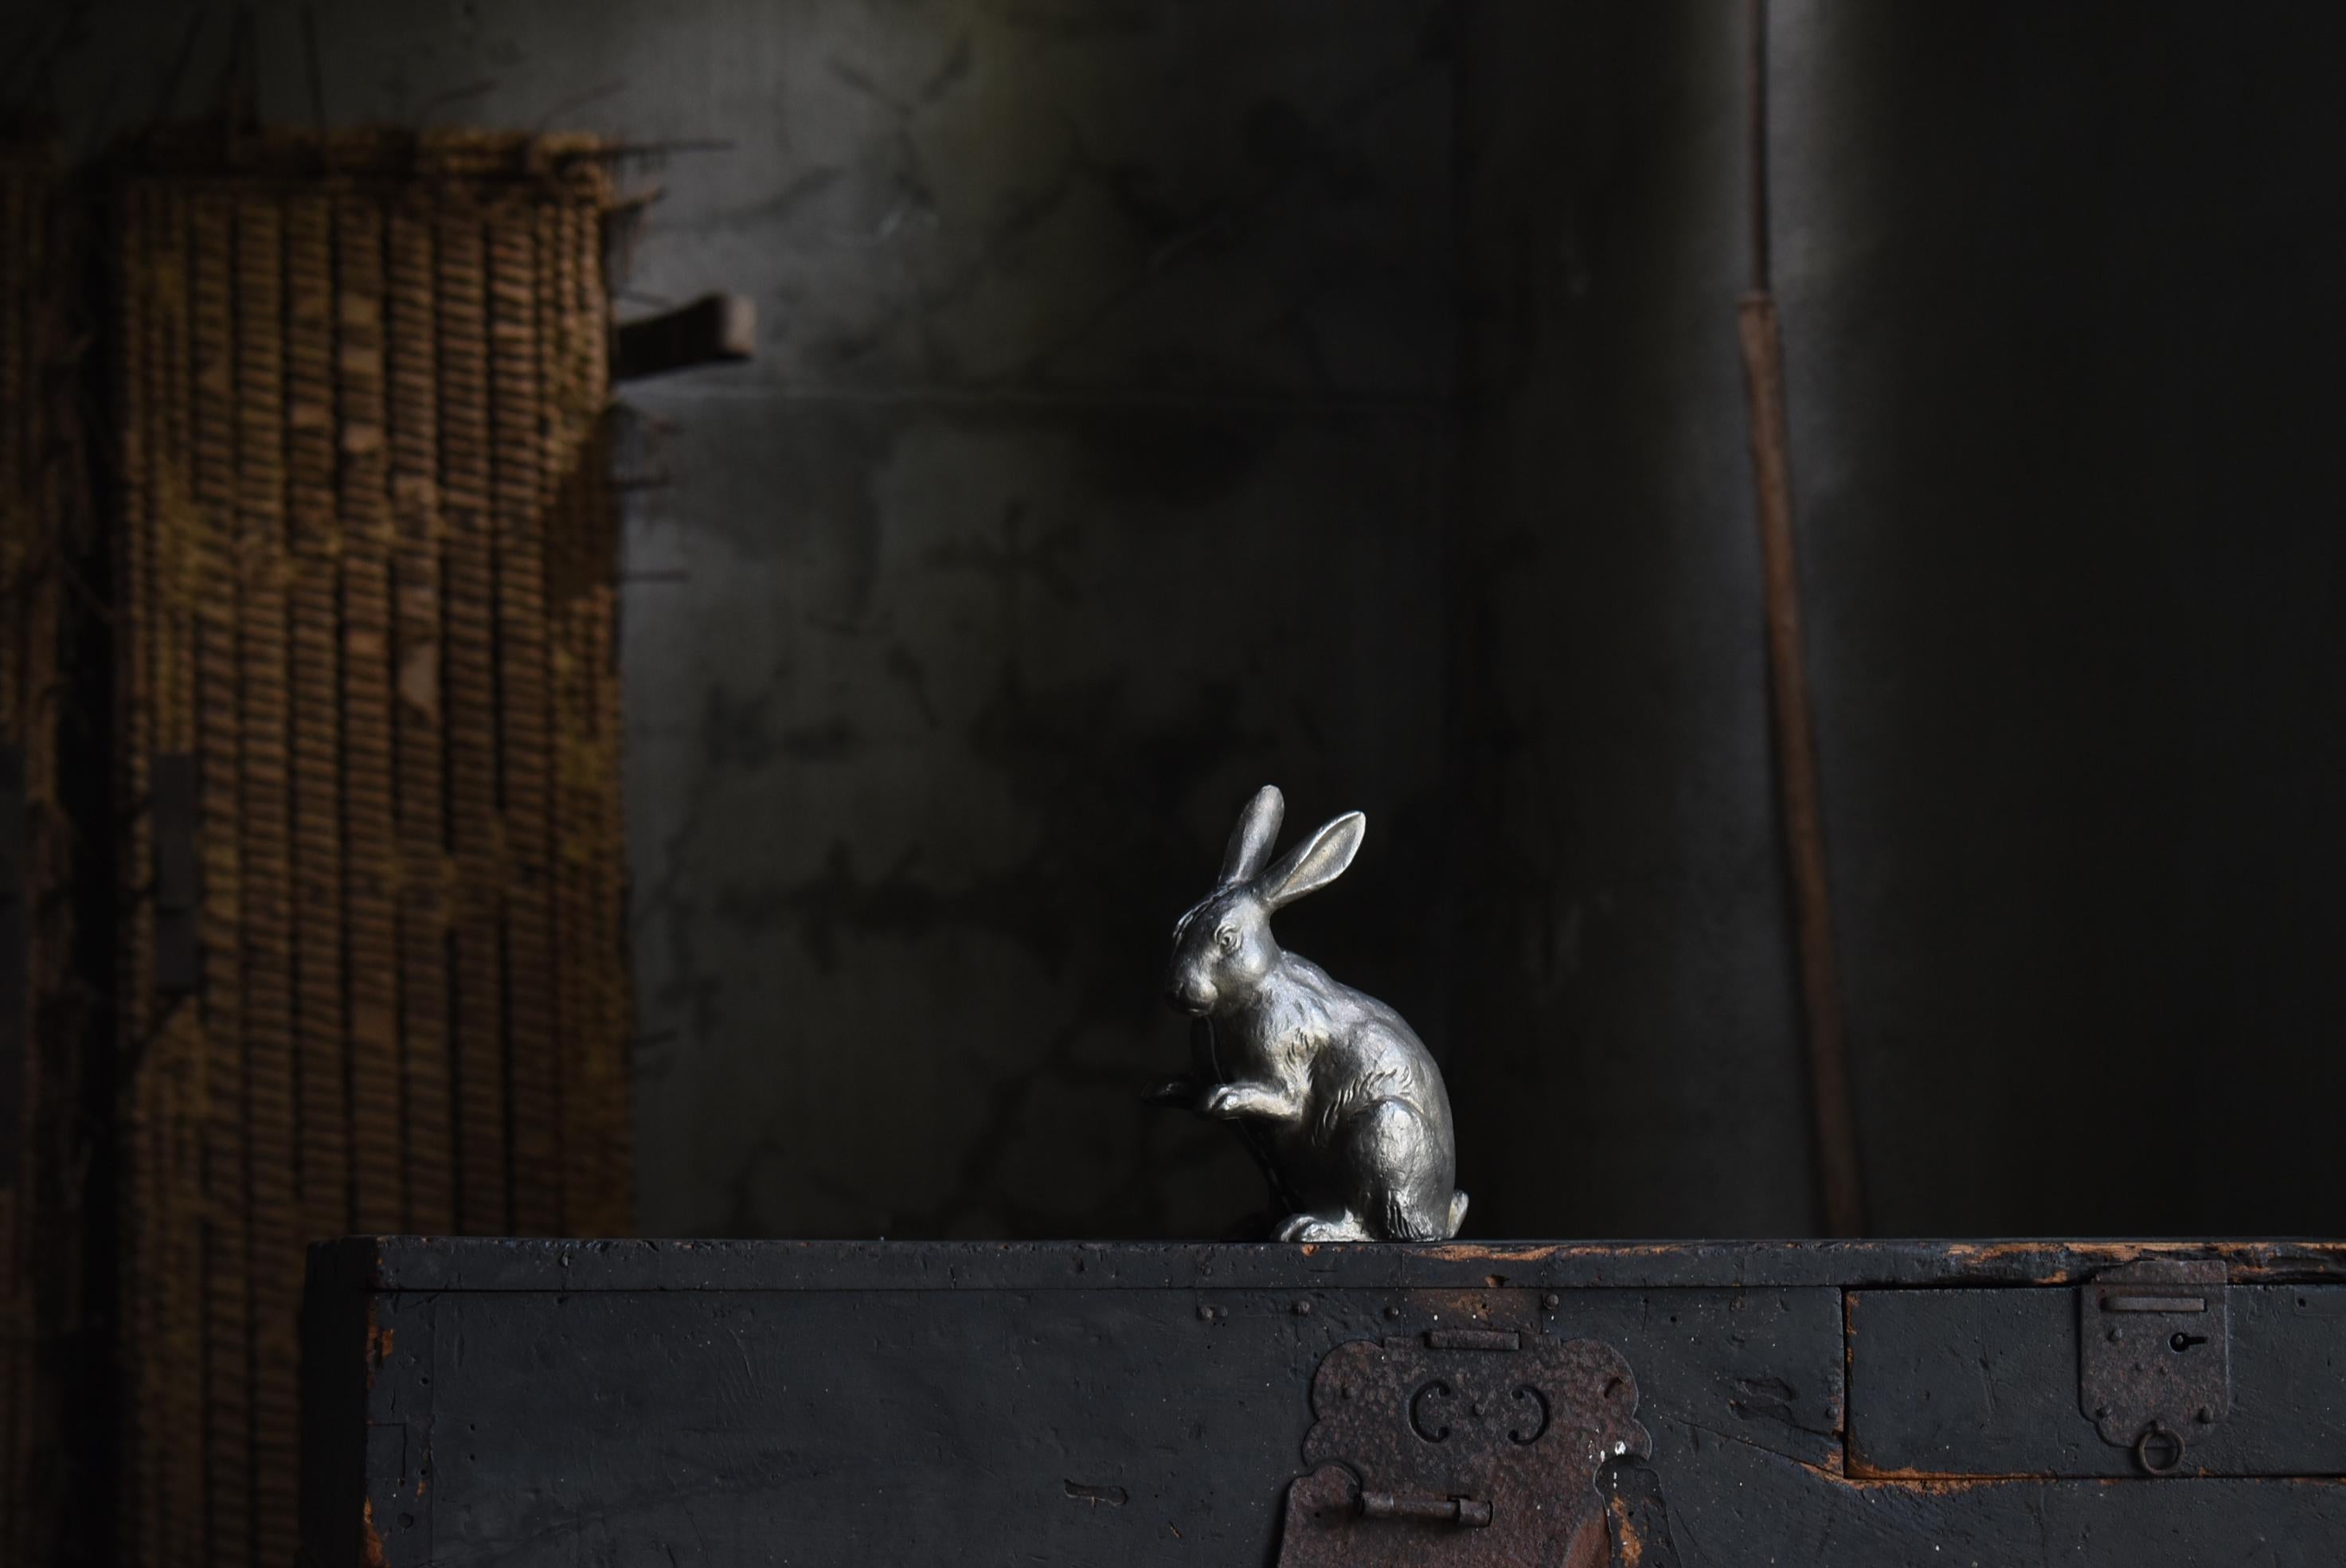 This is an old Japanese iron rabbit figurine.
It is from the mid-Showa period (1940s-1970s).
It is made of cast iron.

Very elaborately made.
It has a sense of massiveness peculiar to cast iron.
Although small in size, it has a strong presence.
It